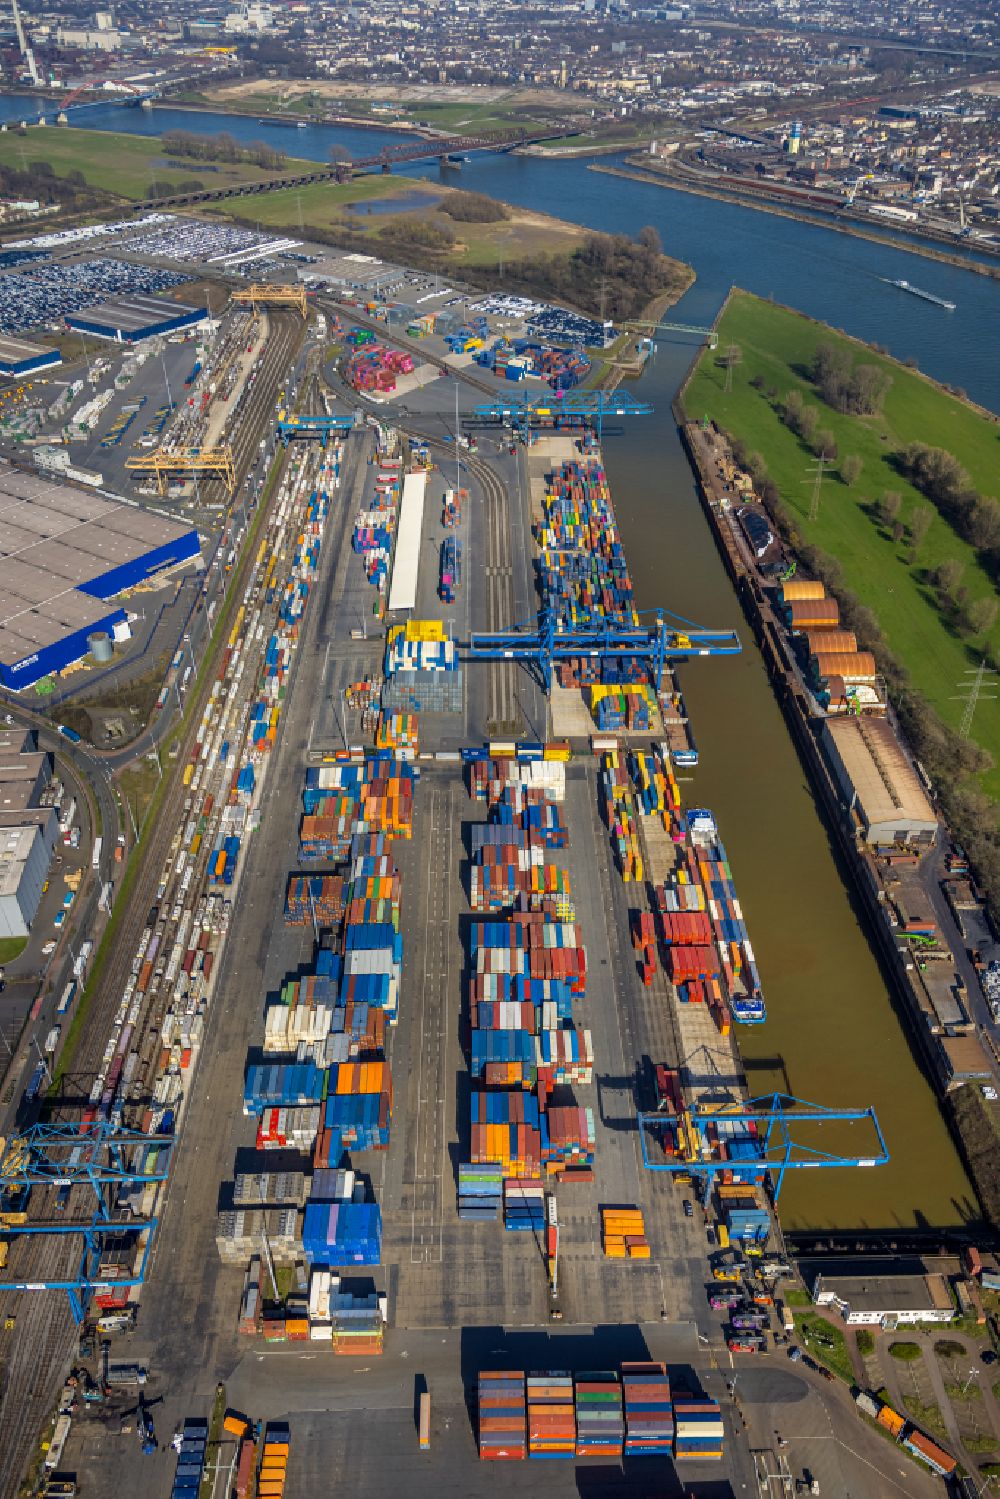 Aerial image Duisburg - of the container terminal in the container port of the inland port of the river Rhein during floods of DIT Duisburg Intermodal Terminal GmbH on Gaterweg in the district of Friemersheim in Duisburg in the state North Rhine-Westphalia, Germany